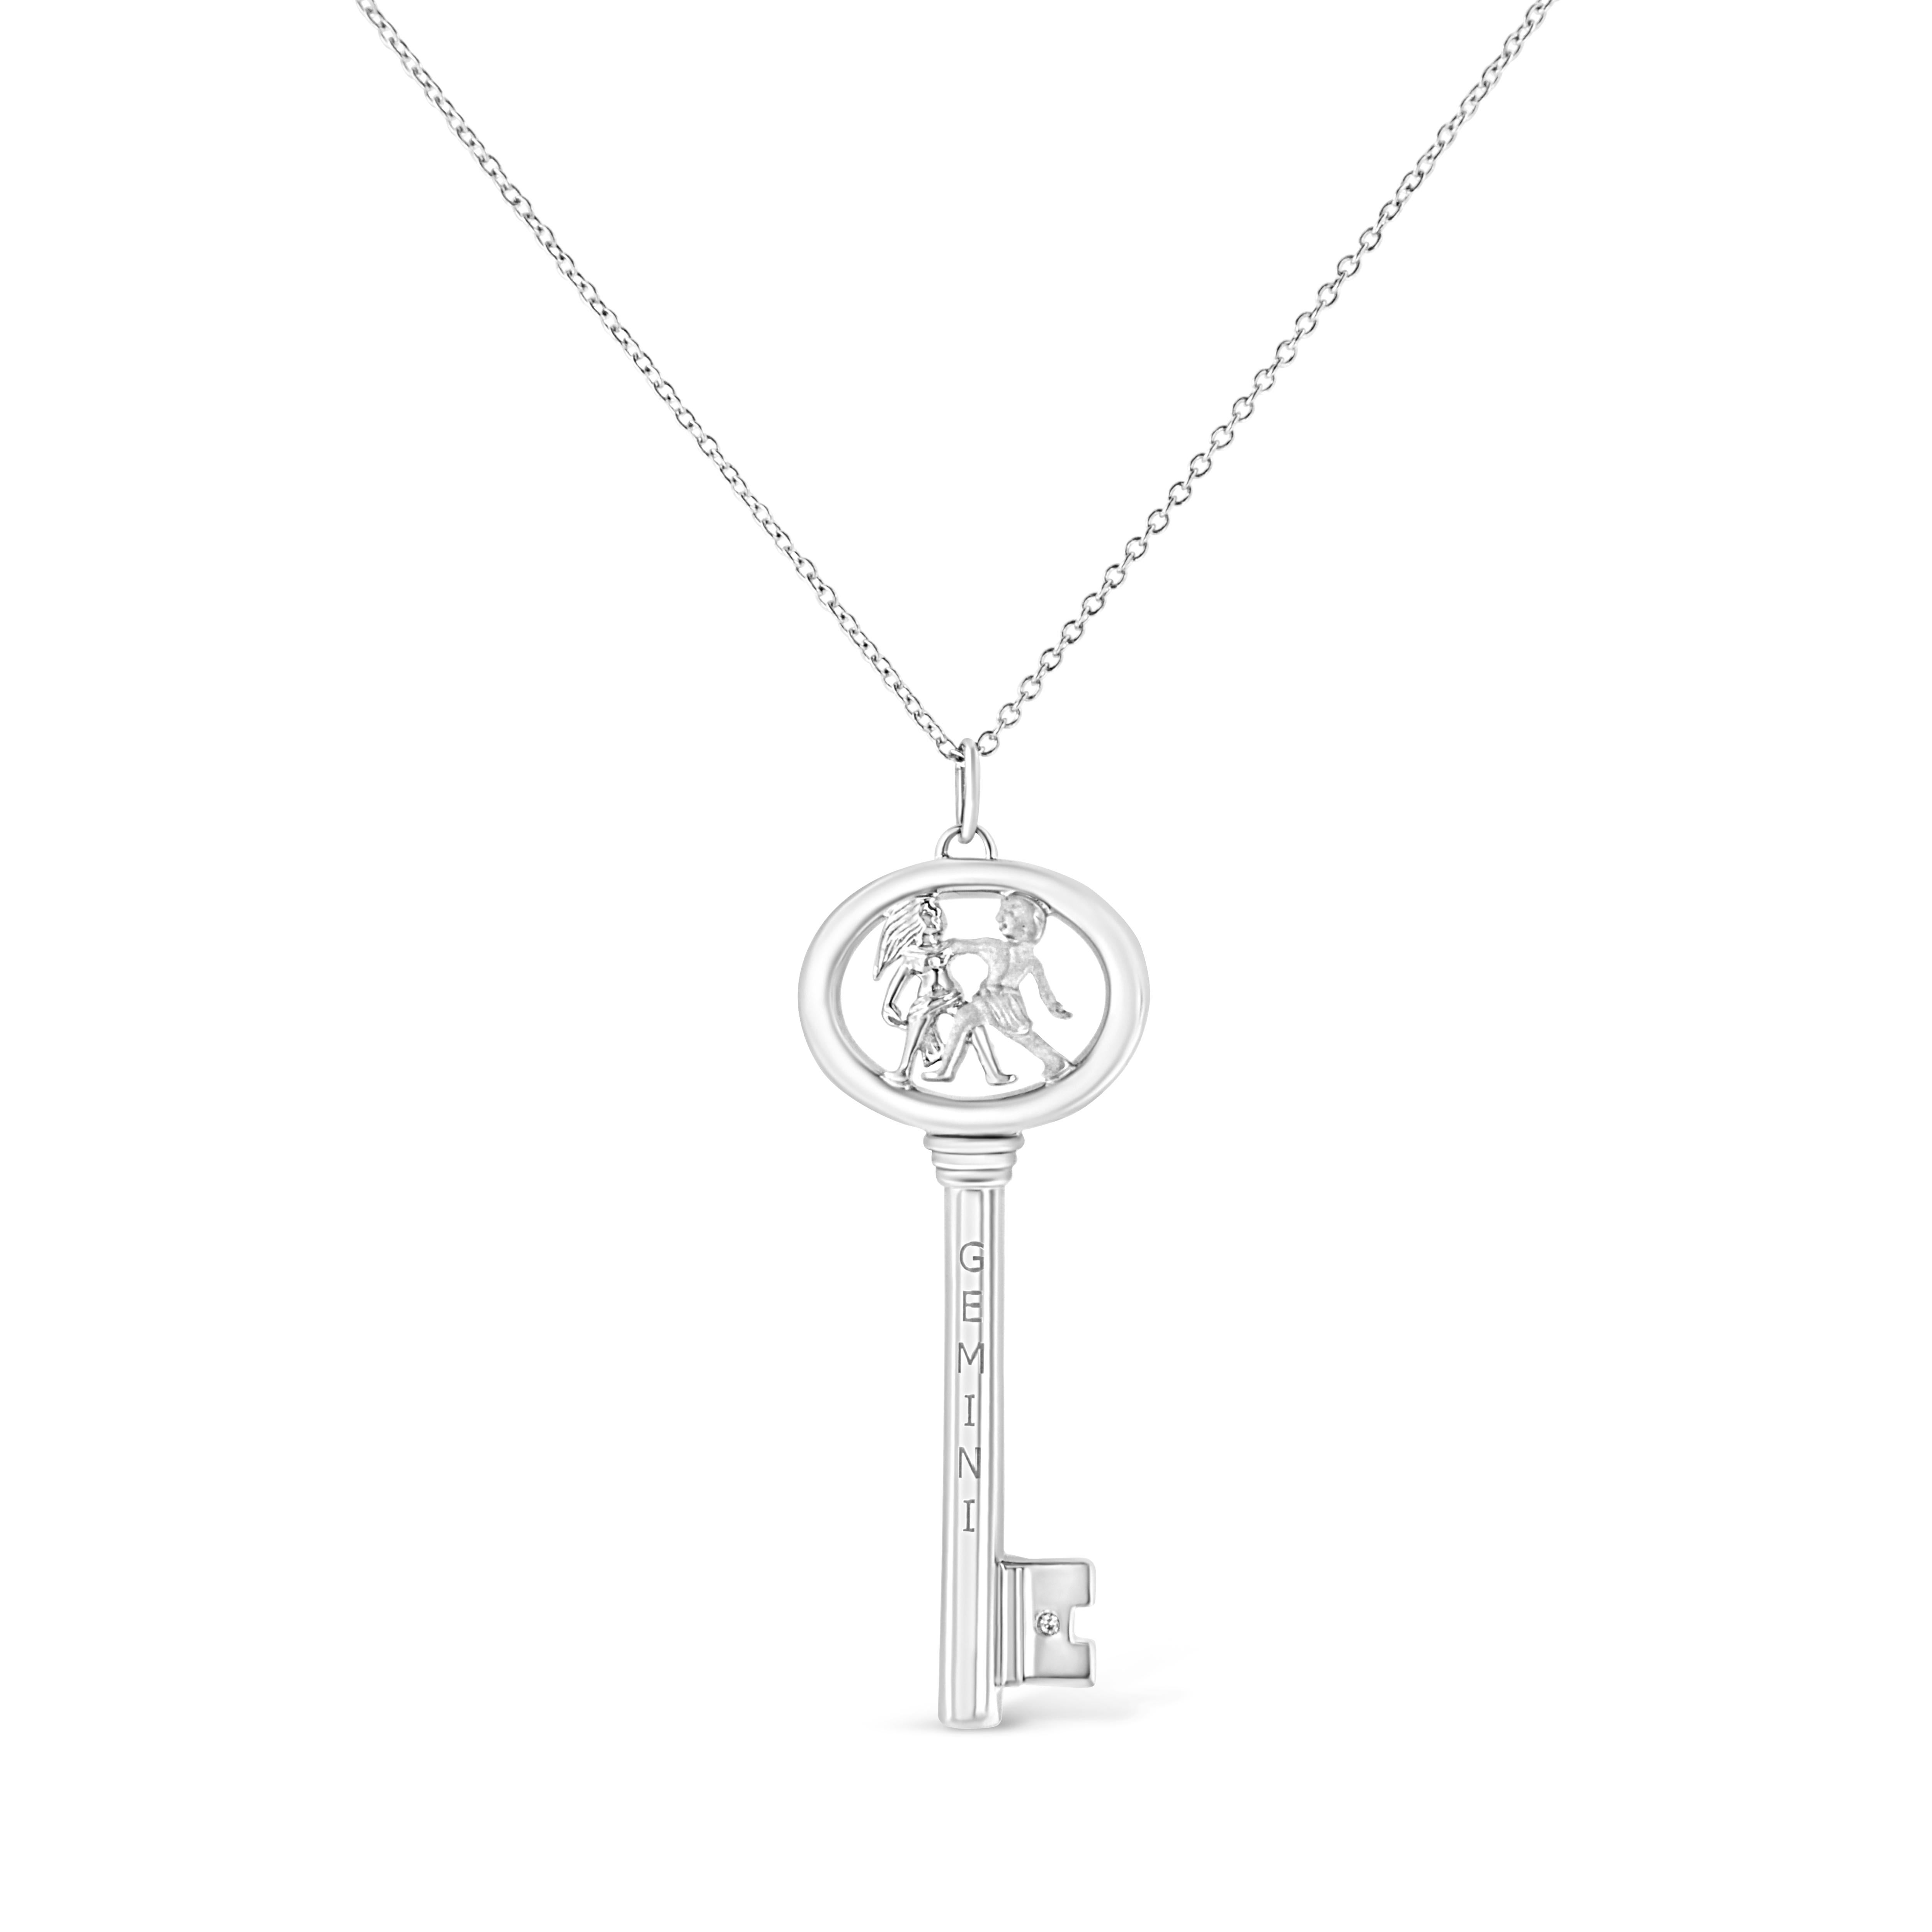 It's as if the stars aligned to create this stunning .925 Sterling Silver necklace flaunting a Gemini zodiac pendant accented by a glimmering bezel set natural diamond. Brilliant beacons of optimism and hope, our Zodiac Keys are radiant symbols of a